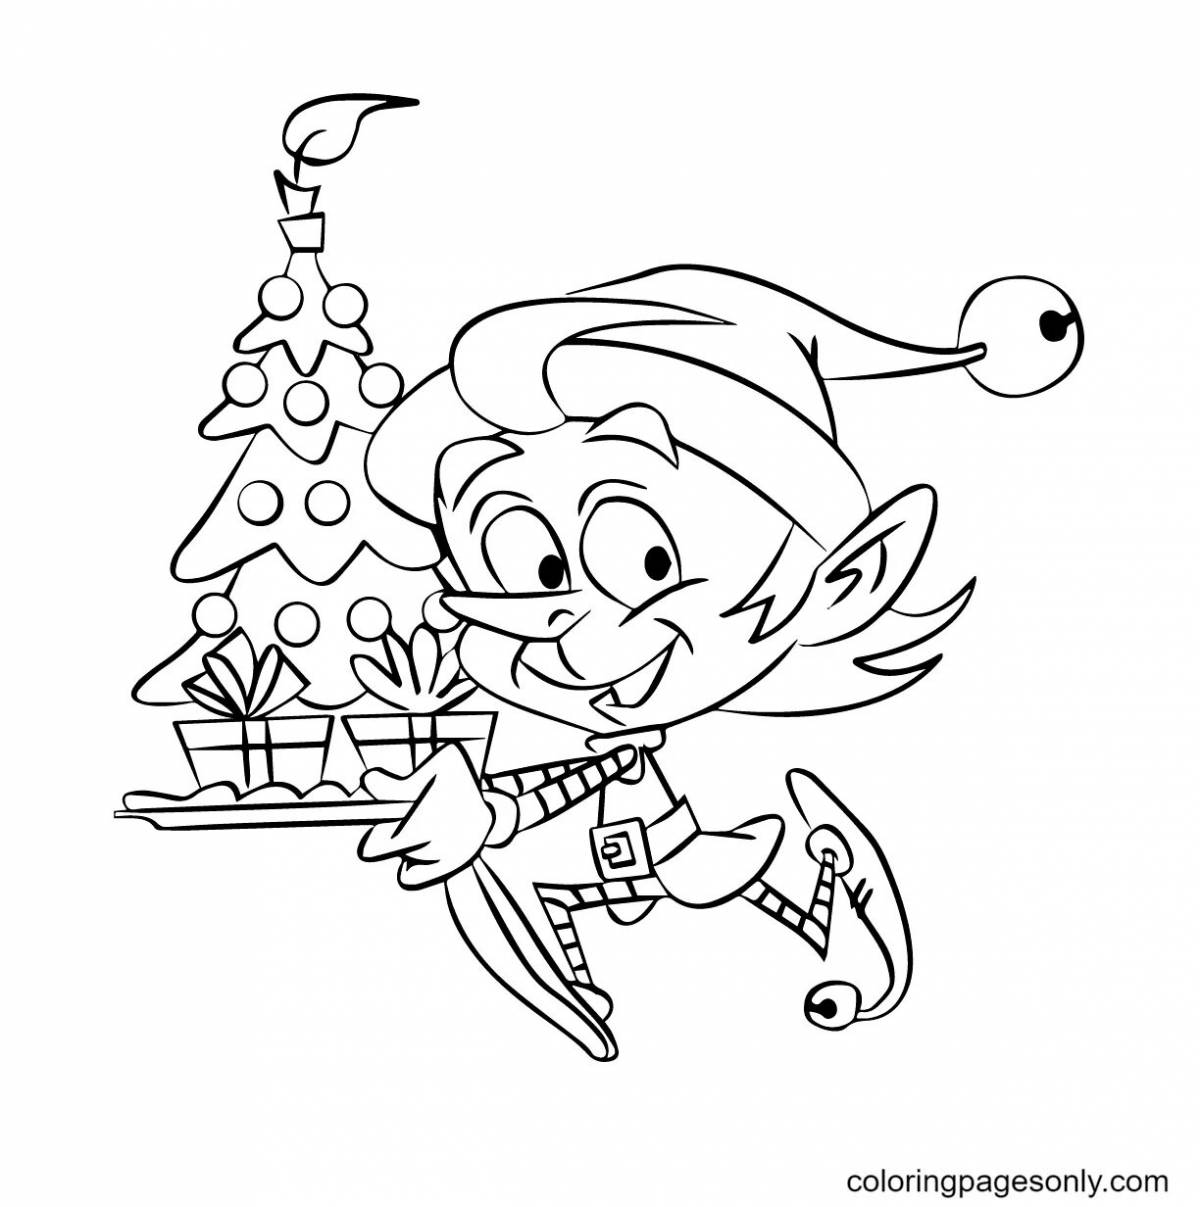 Live coloring christmas elf